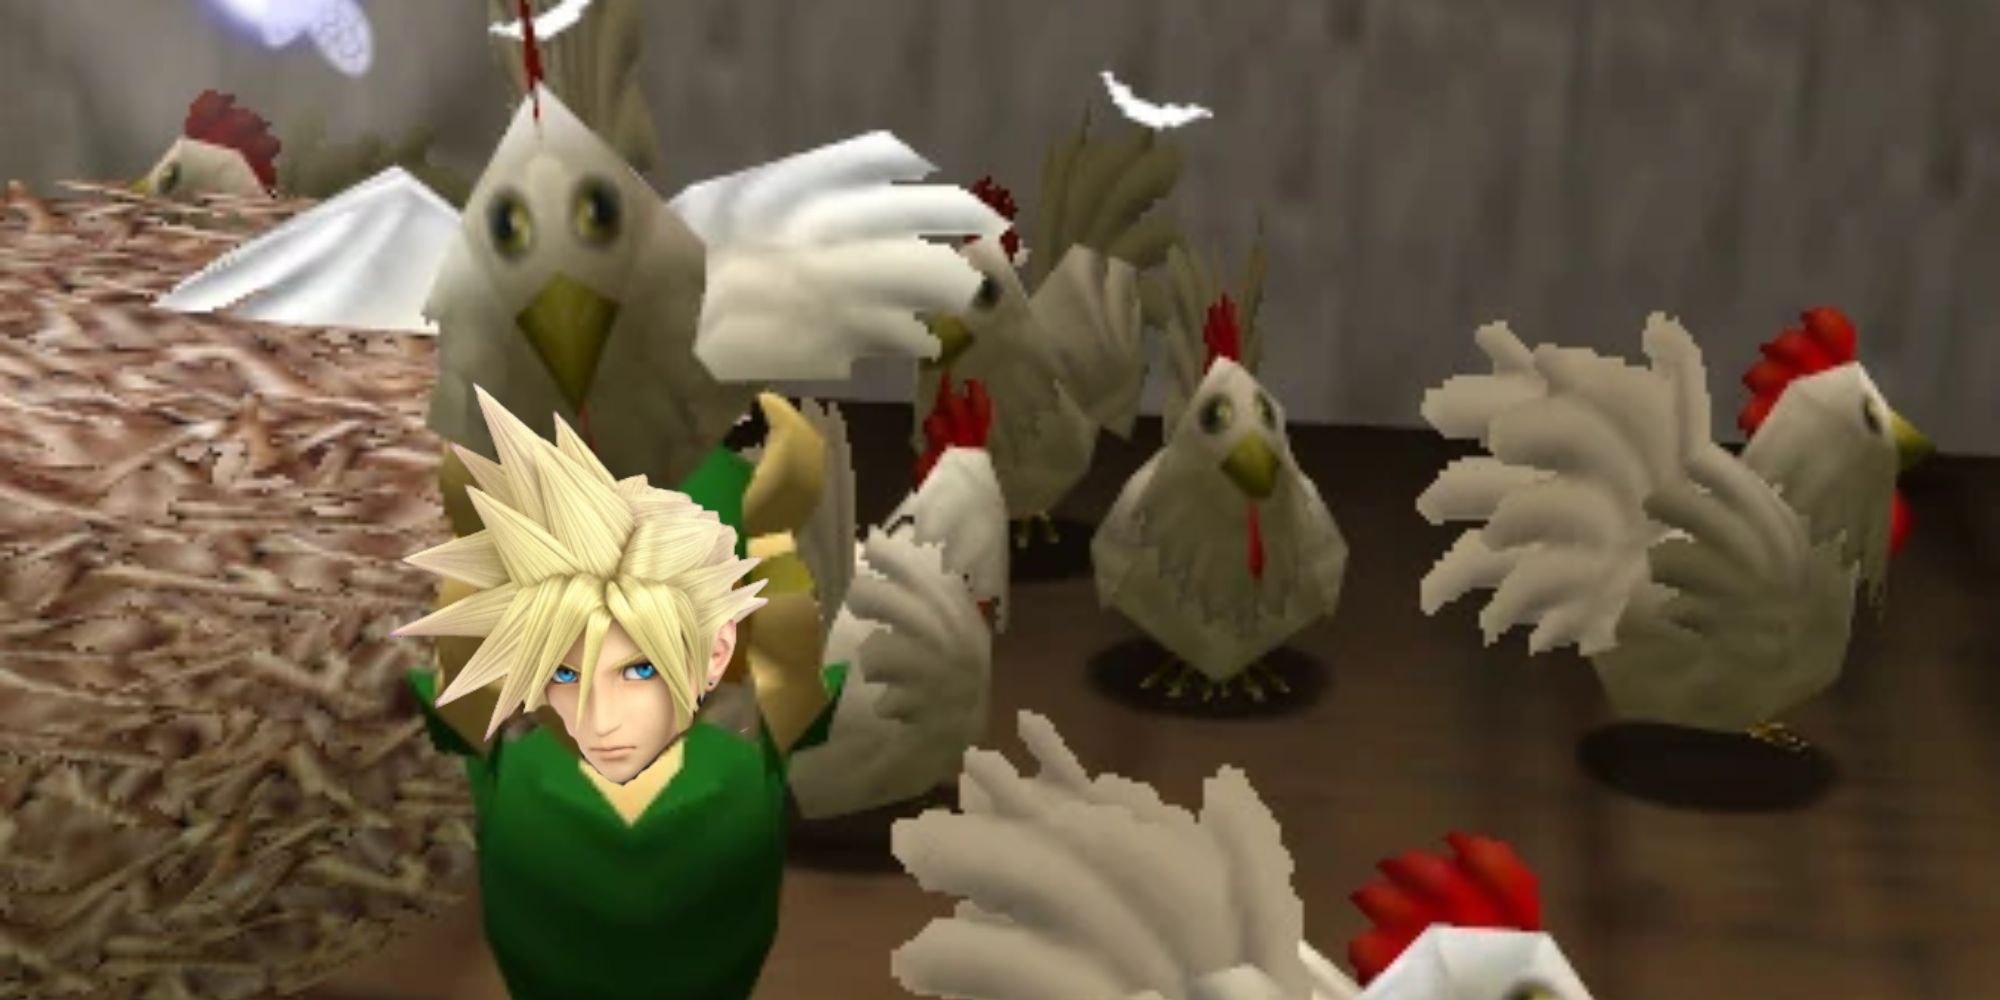 Cloud as Link throwing a Cucoo